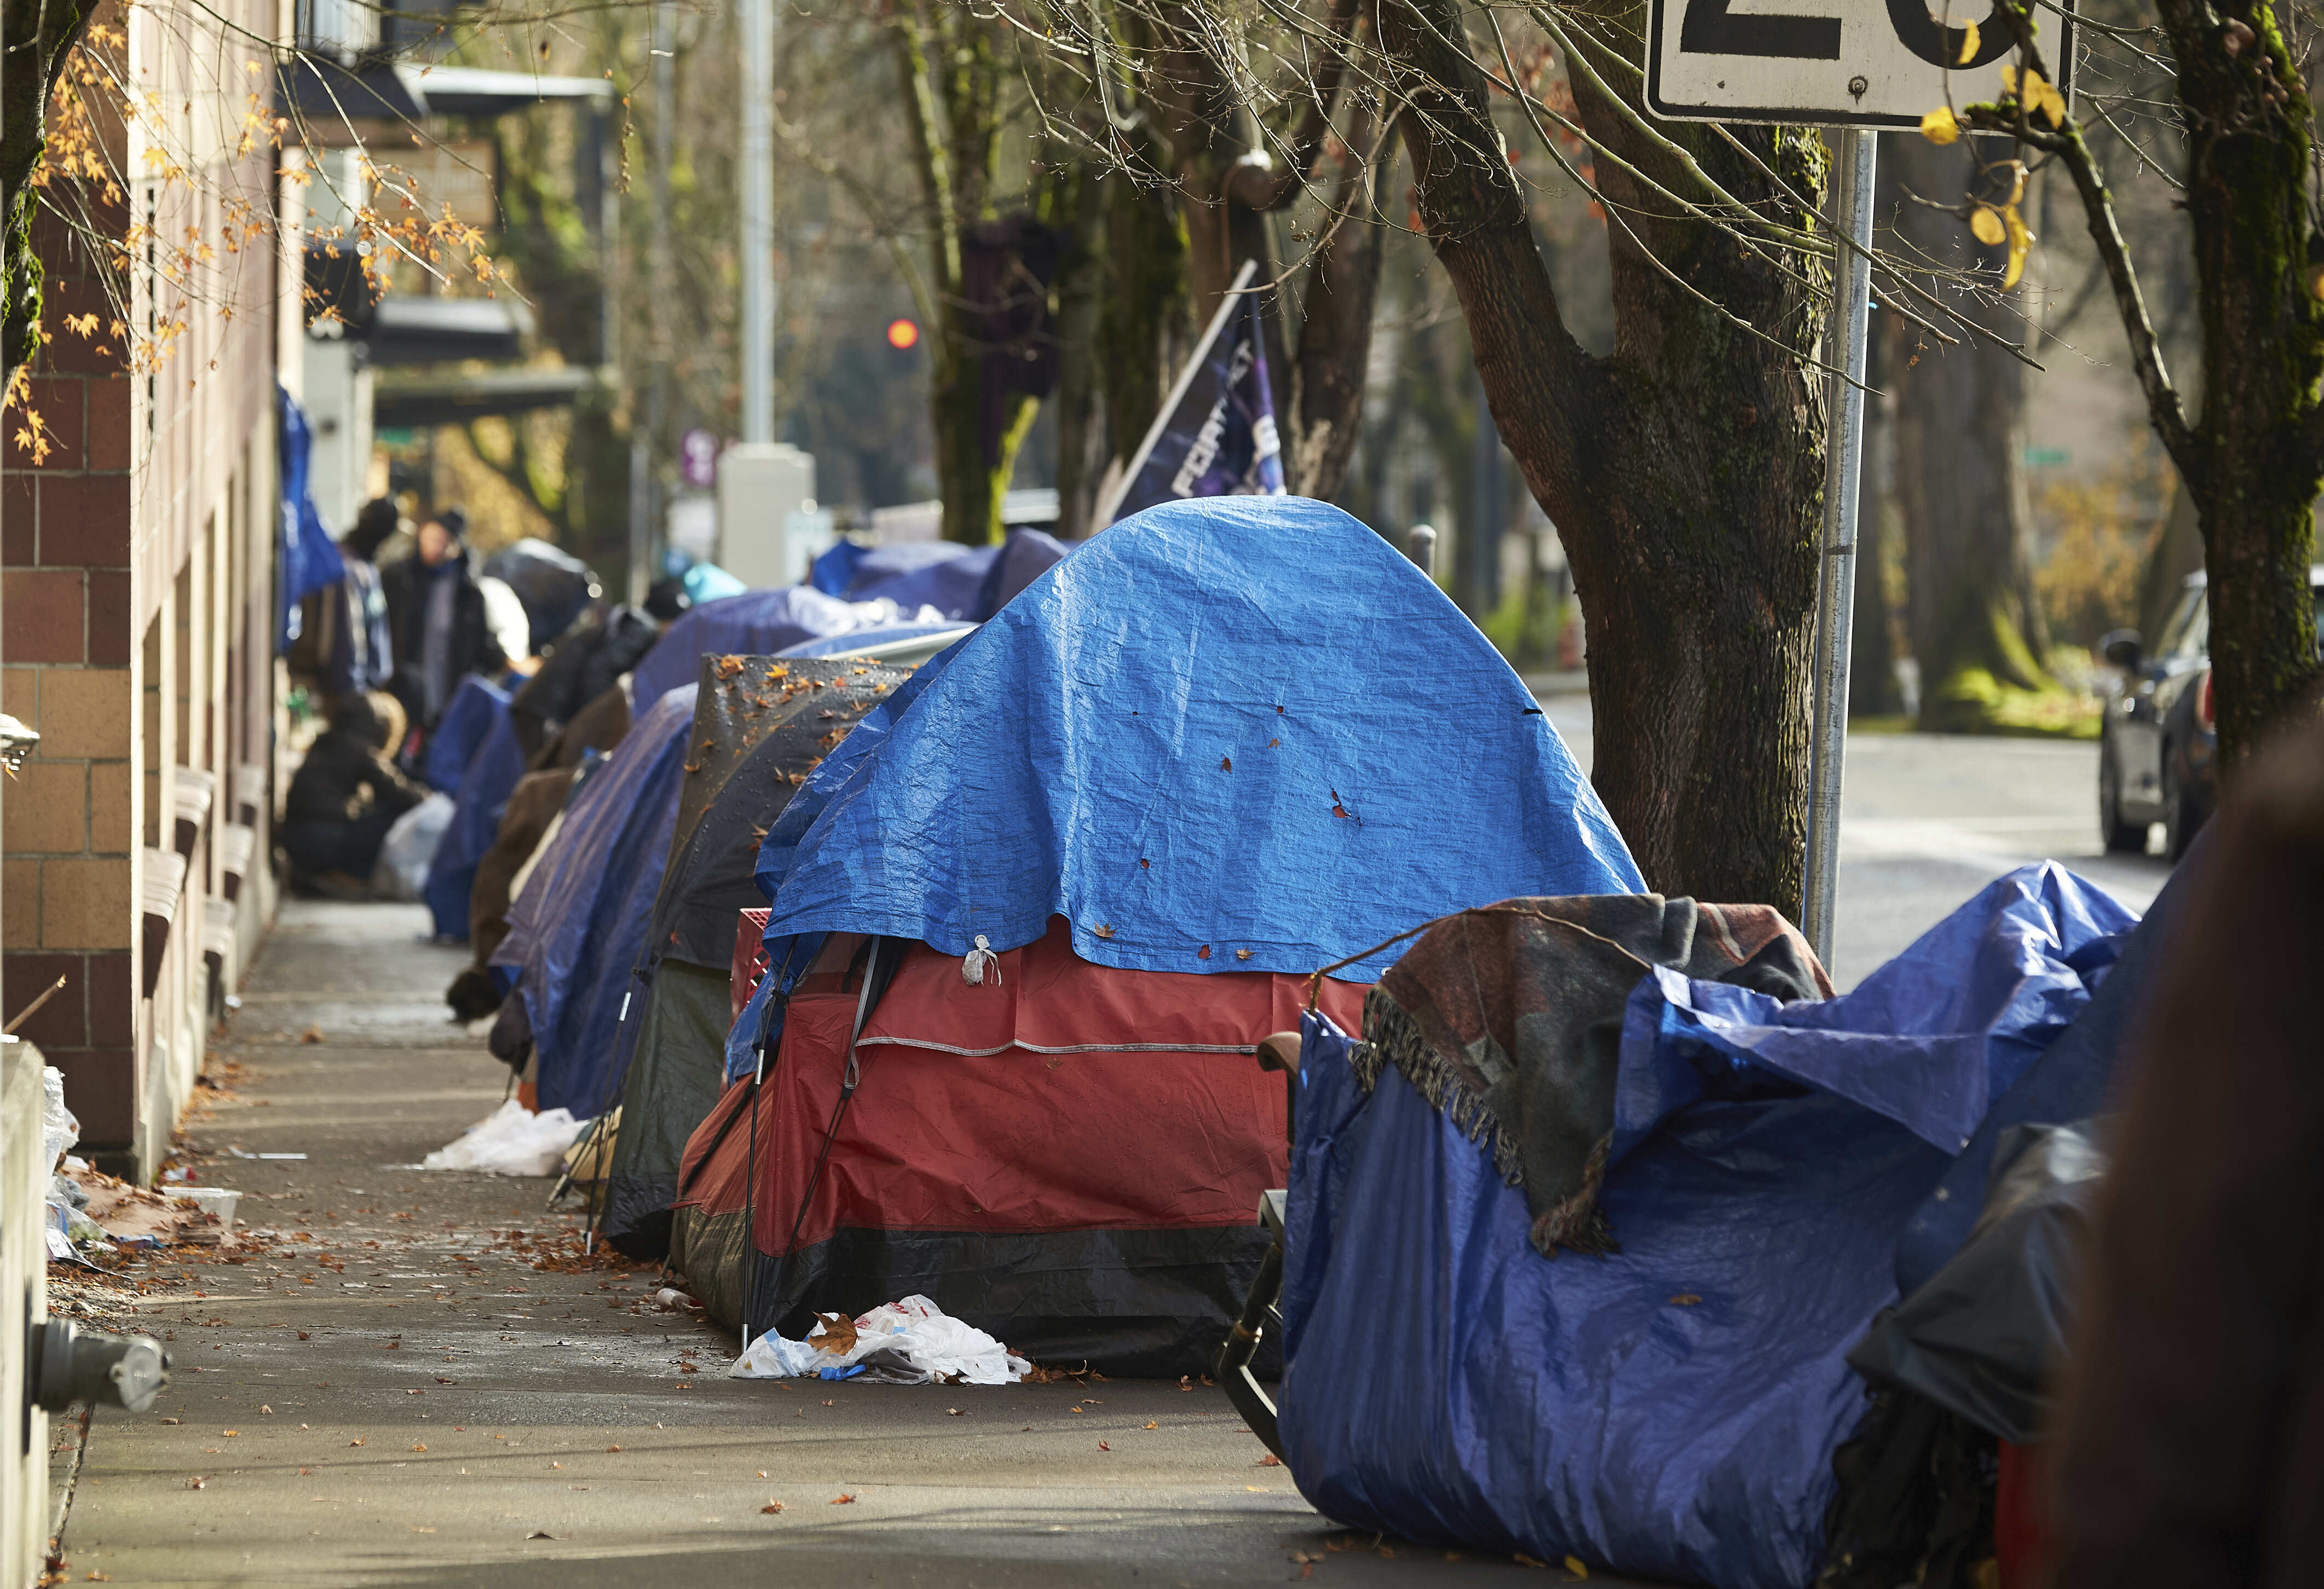 FILE: There were 582,462 people sleeping on the streets of the U.S. during a single night in January this year, according to the U.S. Department of Housing and Urban Development — a 0.3% increase since 2020.